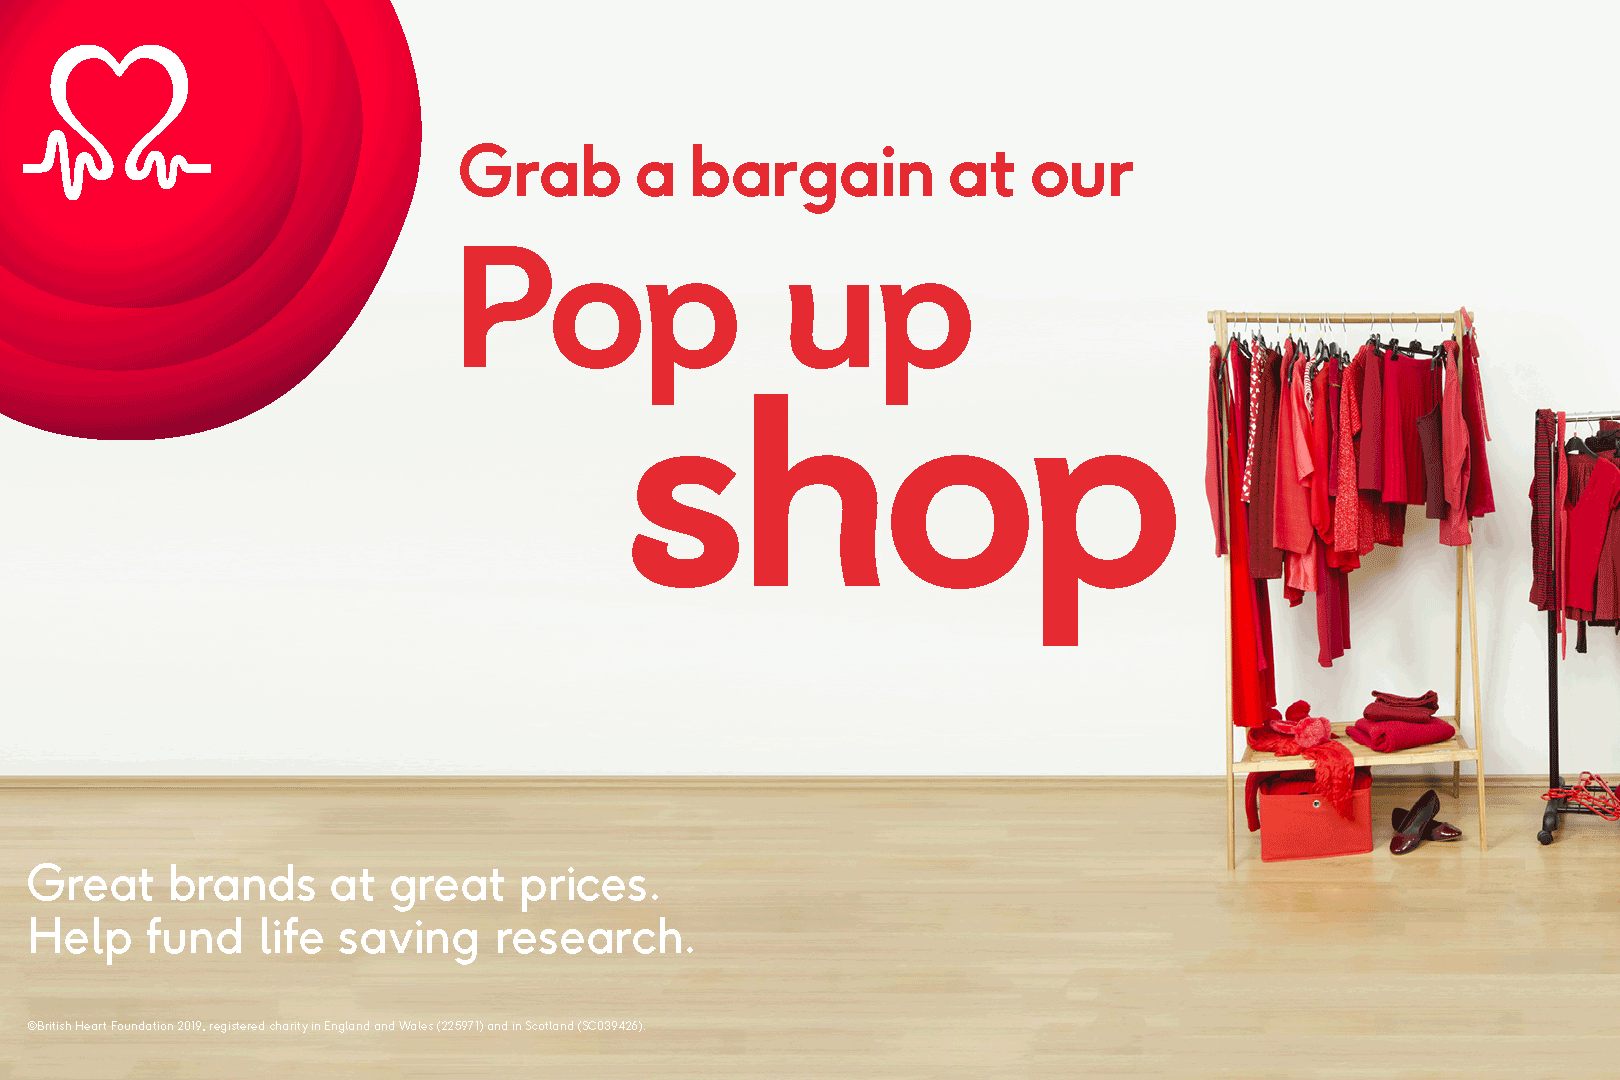 Grab a bargain at our pop up shop. British Heart Foundation.